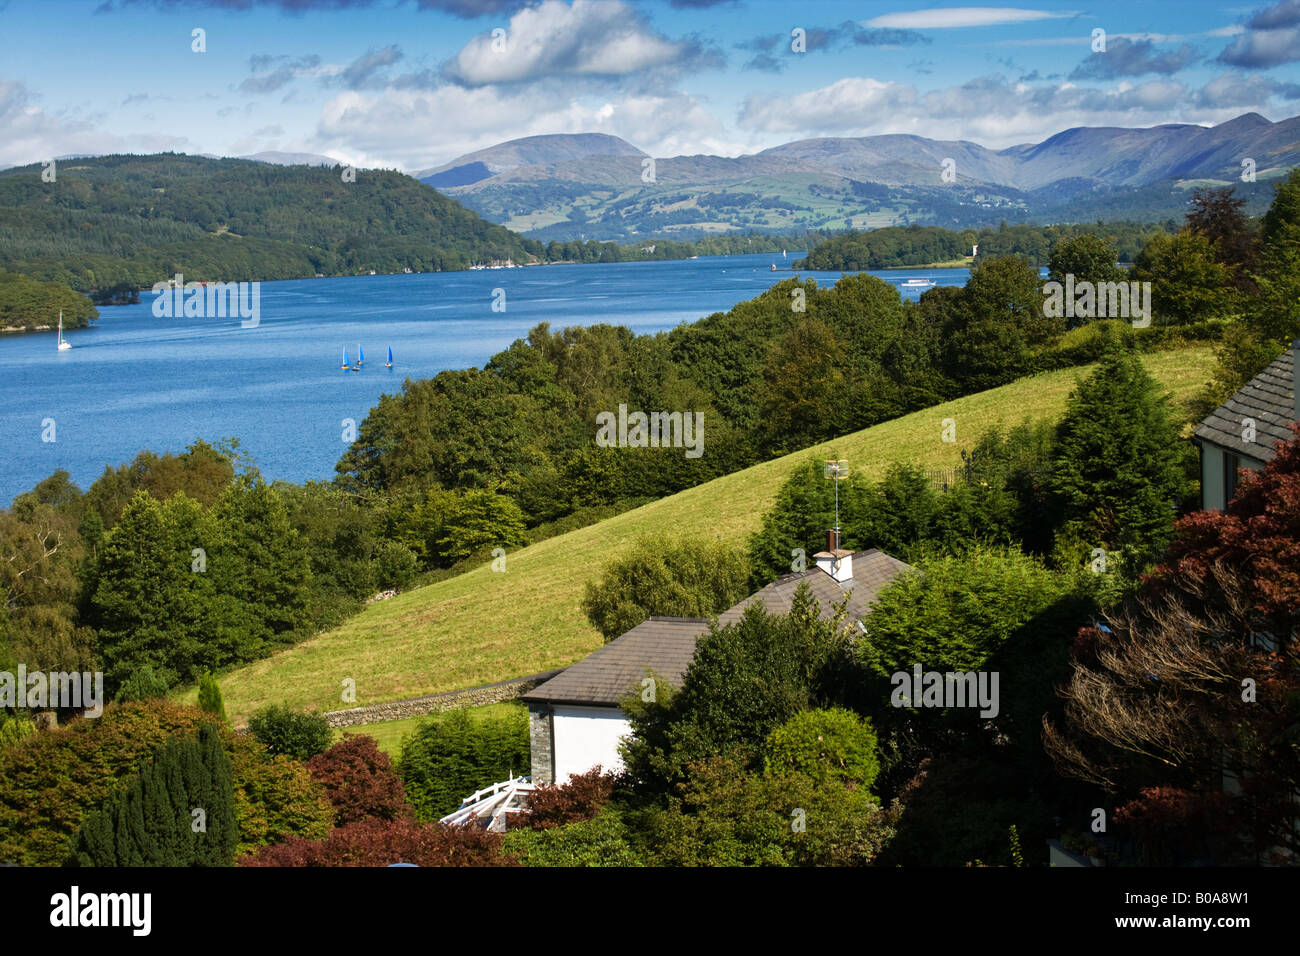 Lake Windermere Seen From The East Shoreline While In The Distance The Langdale Pikes, 'The Lake District' Cumbria England Stock Photo